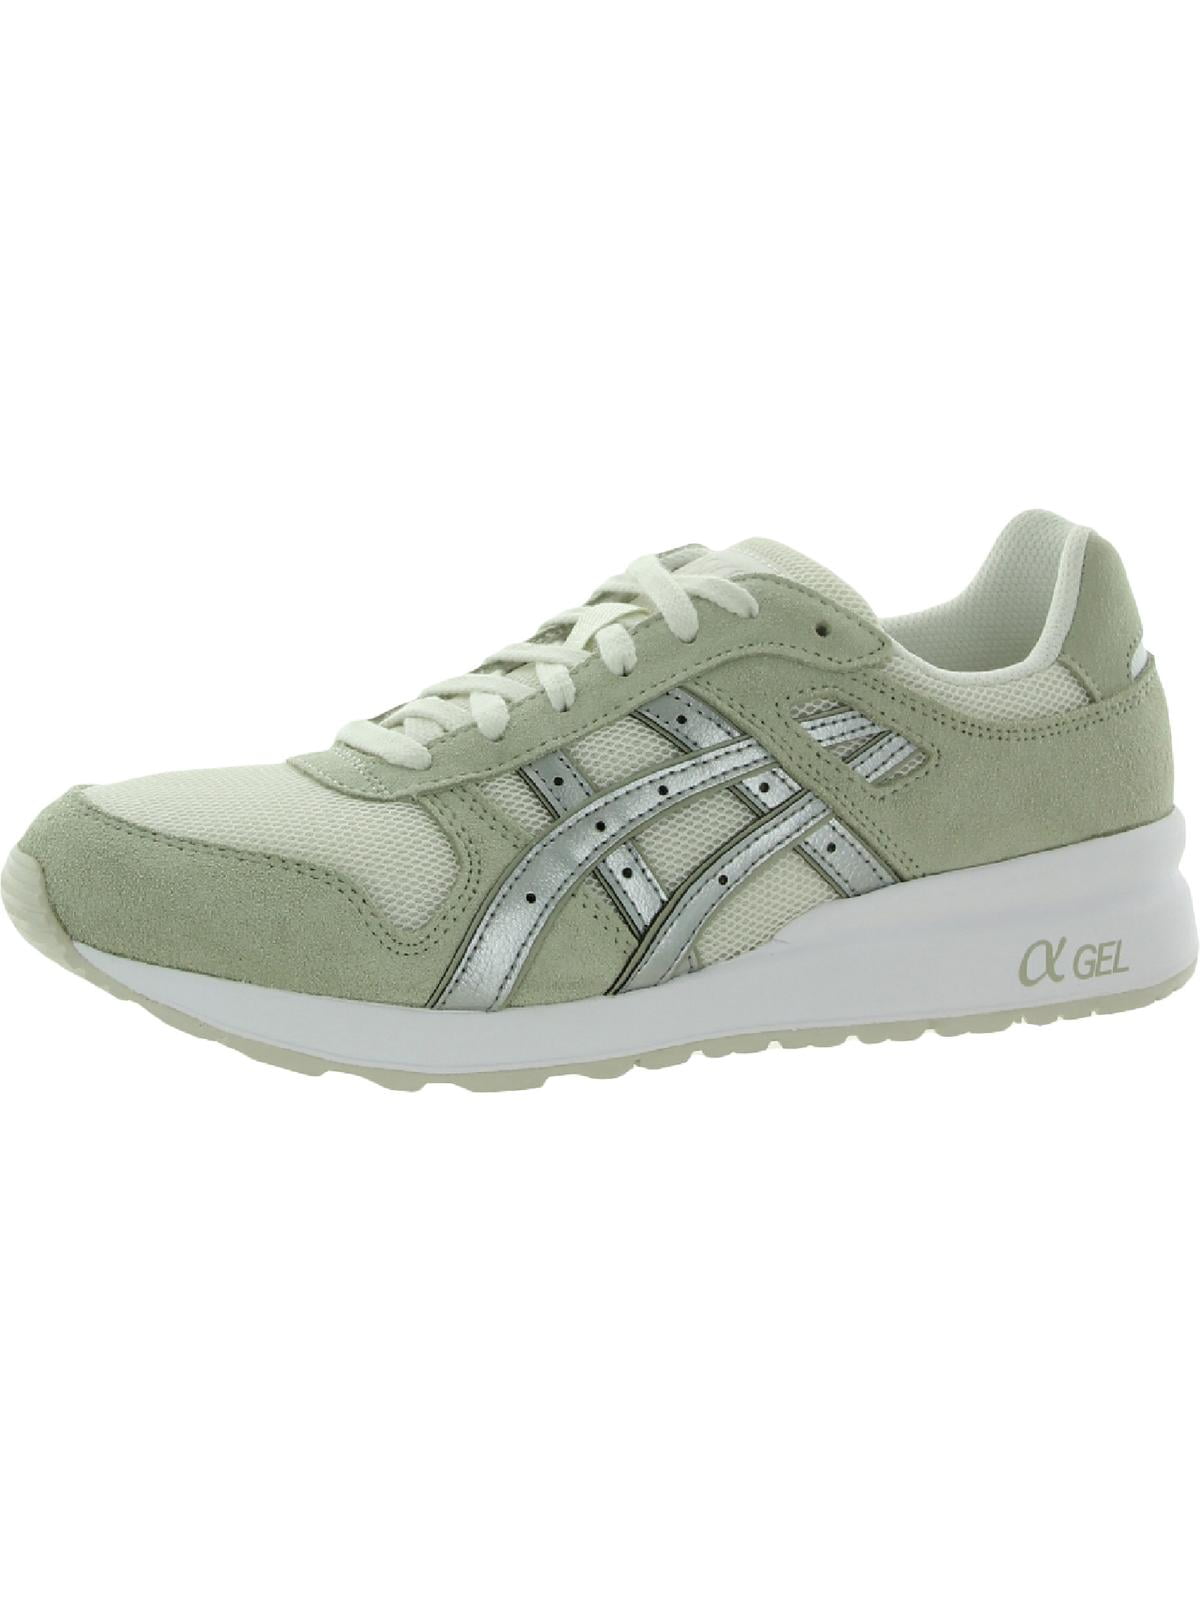 Asics GT-II Suede Sport Casual and Fashion Sneakers Walmart.com